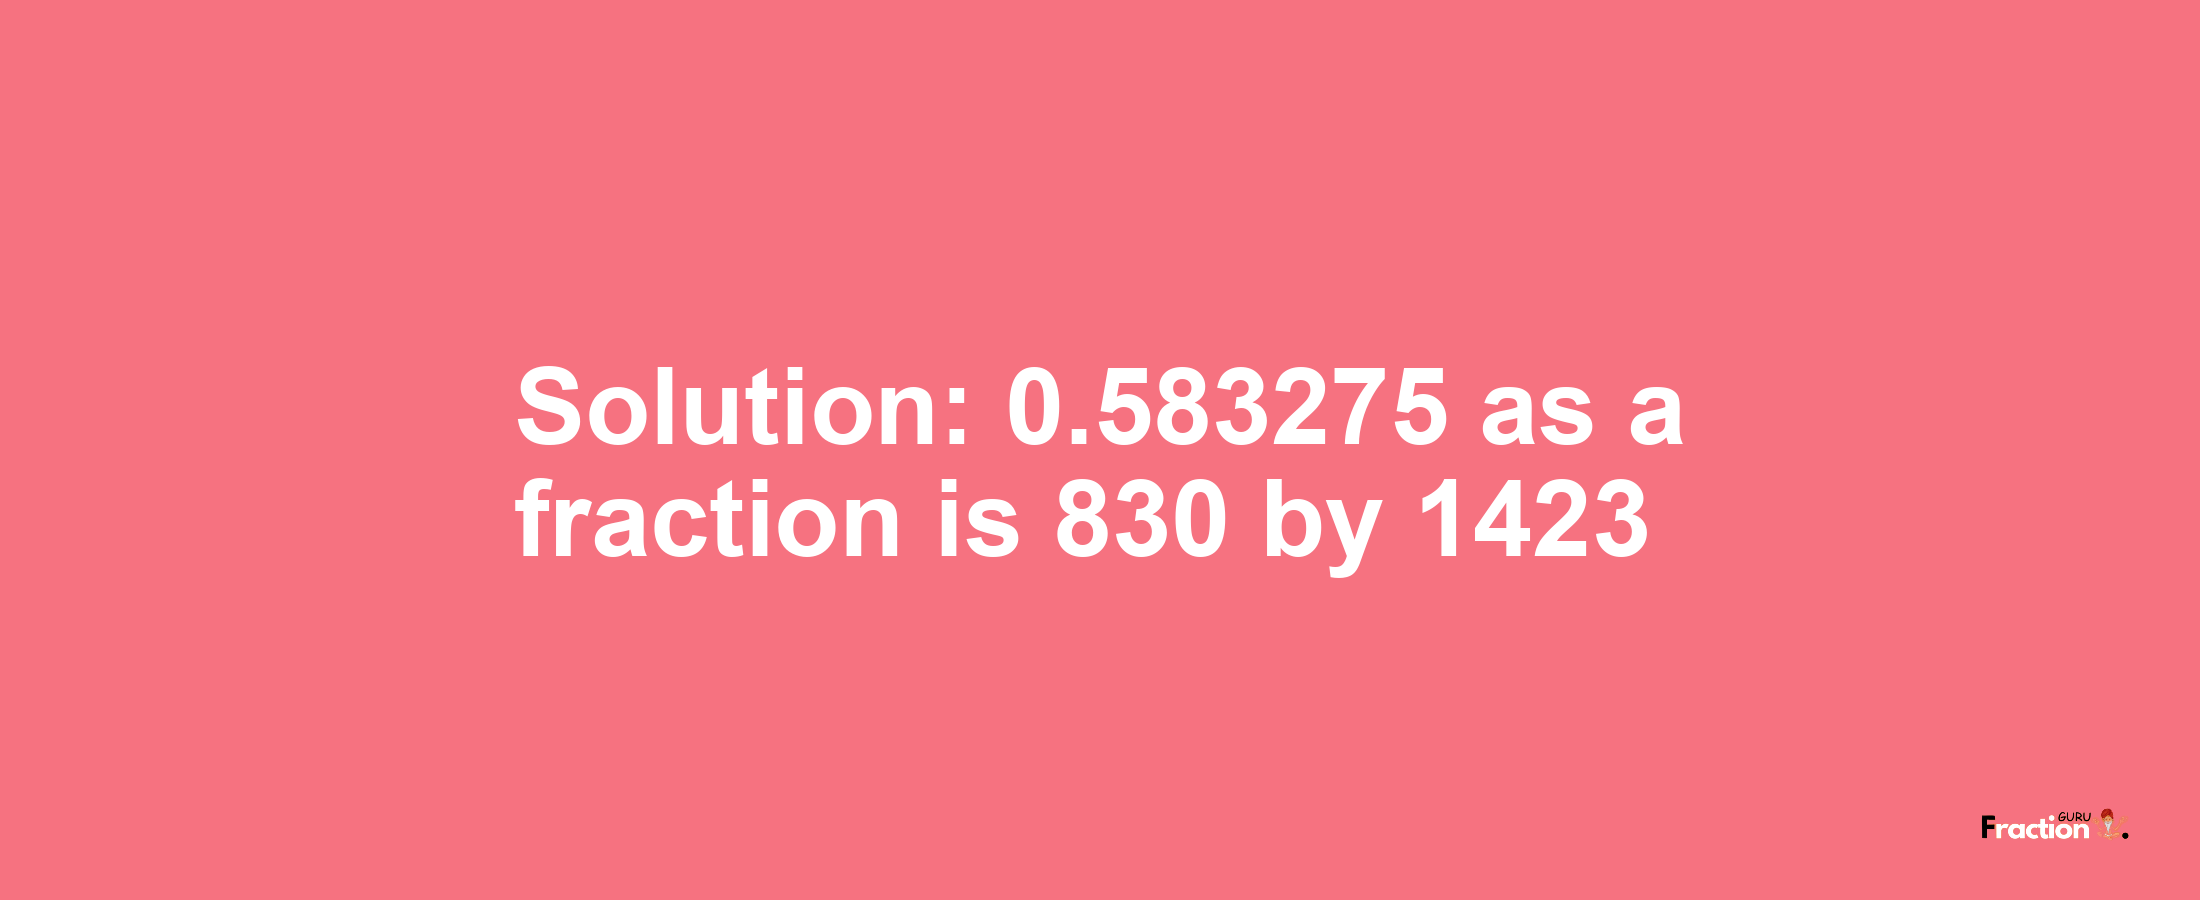 Solution:0.583275 as a fraction is 830/1423